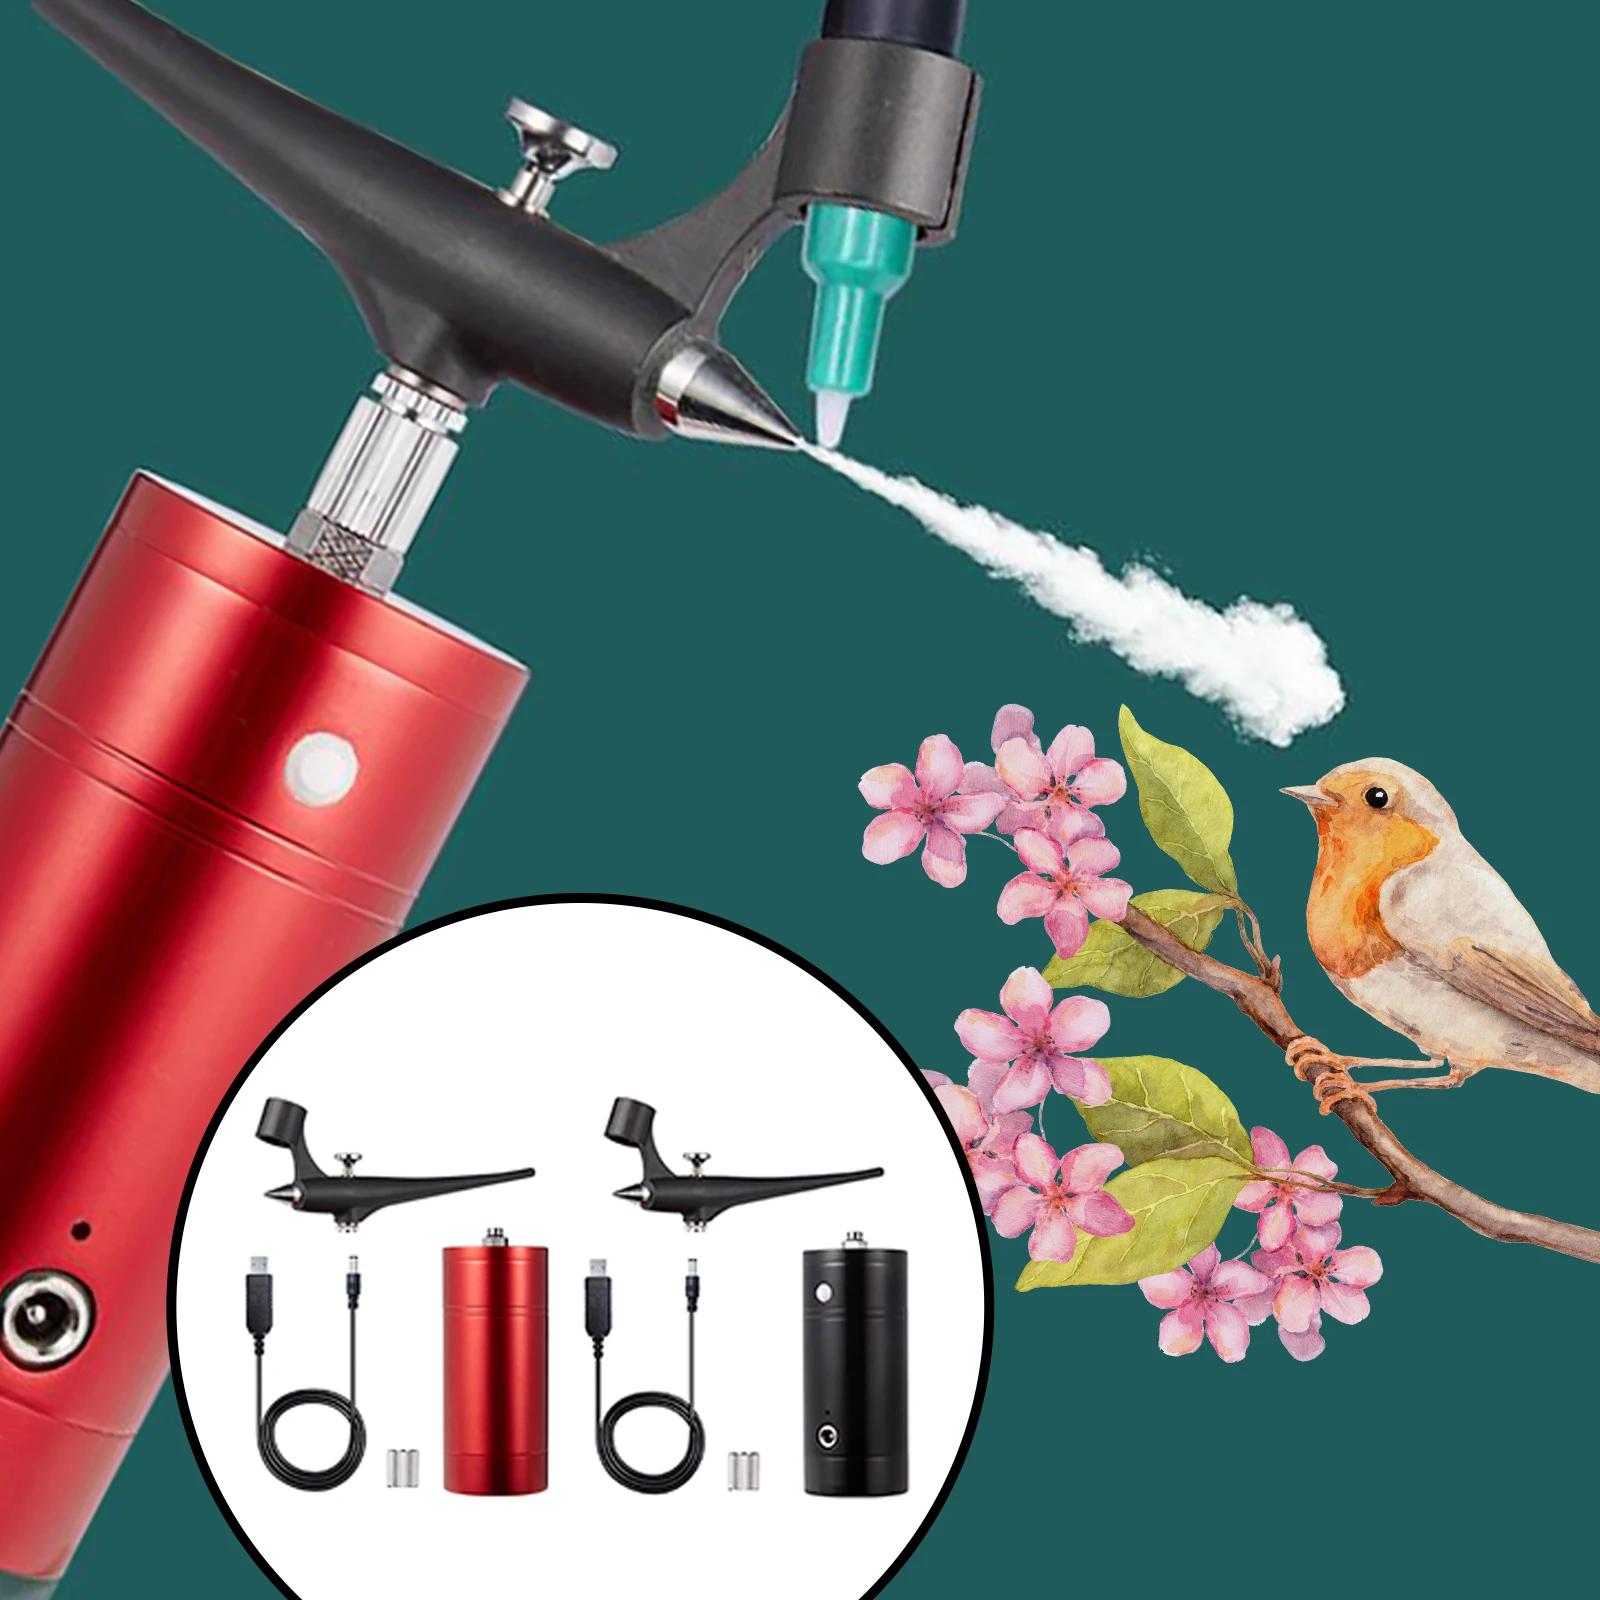 Wireless Airbrush Airbrush Pen Professional Airbrush Kit for Paint Model Coloring Leather